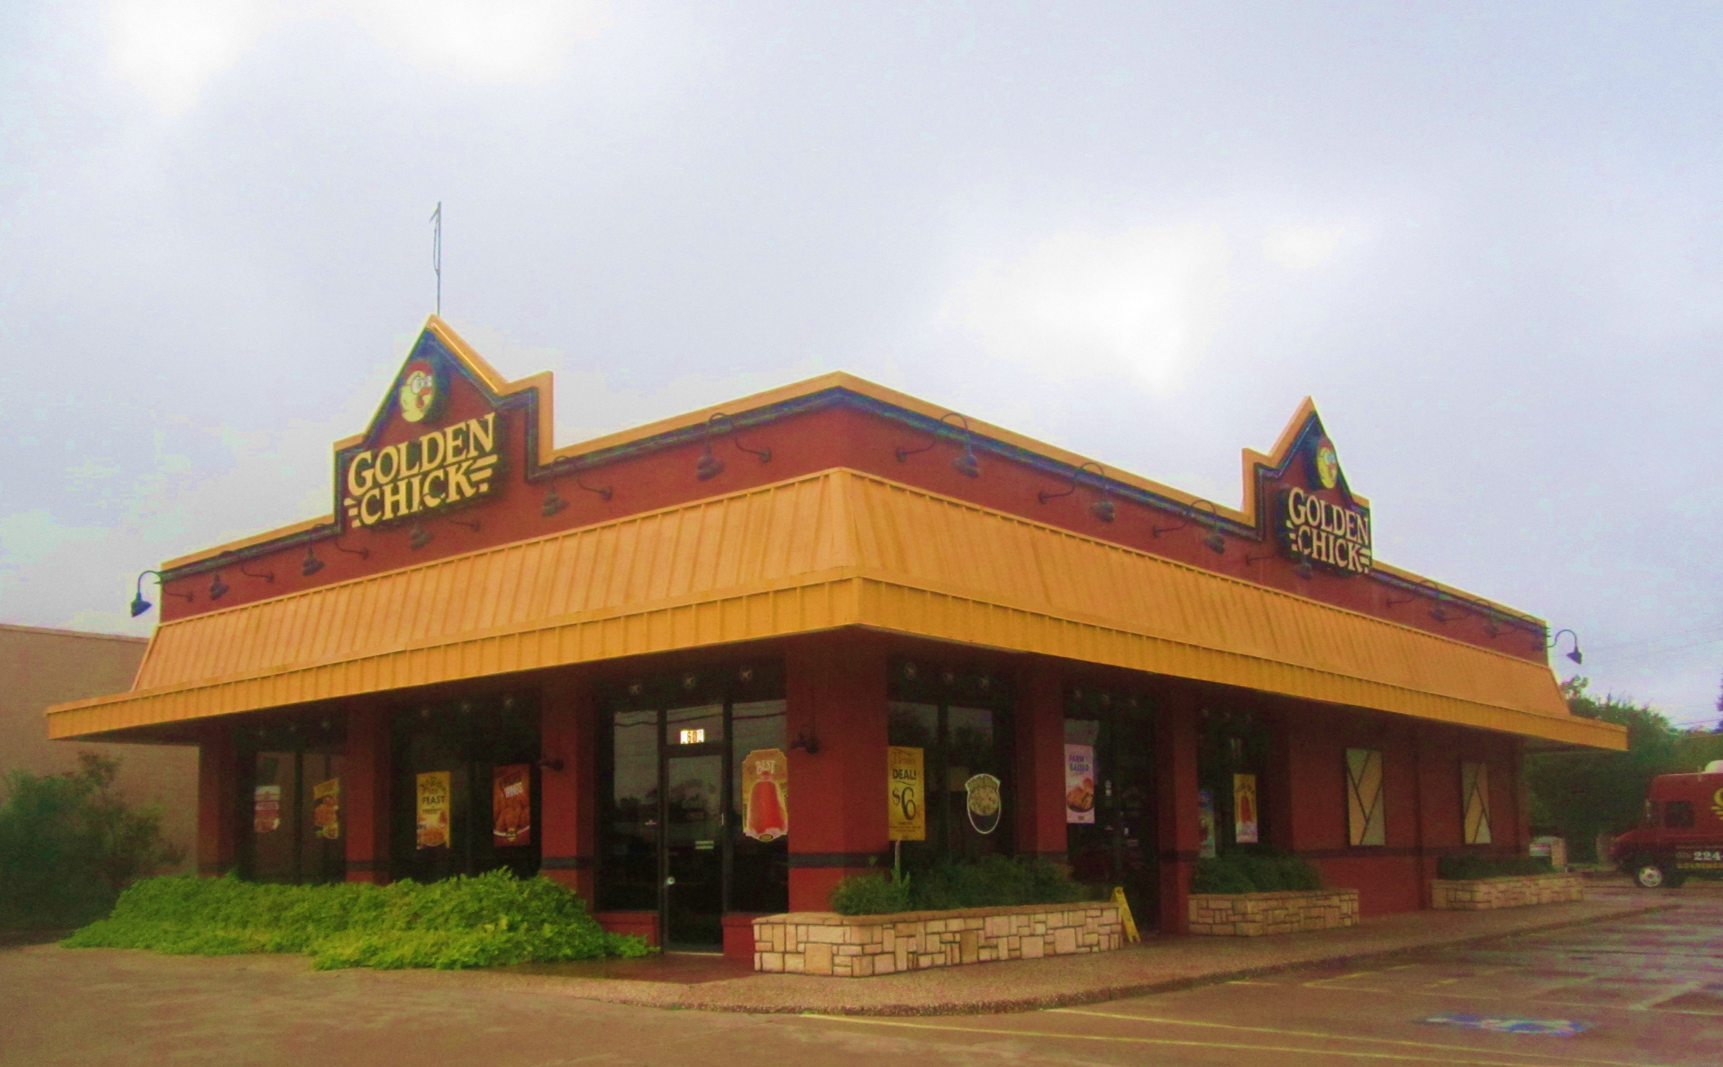 Golden Chick storefront.  Your local Golden Chick fast food restaurant in San Angelo, Texas